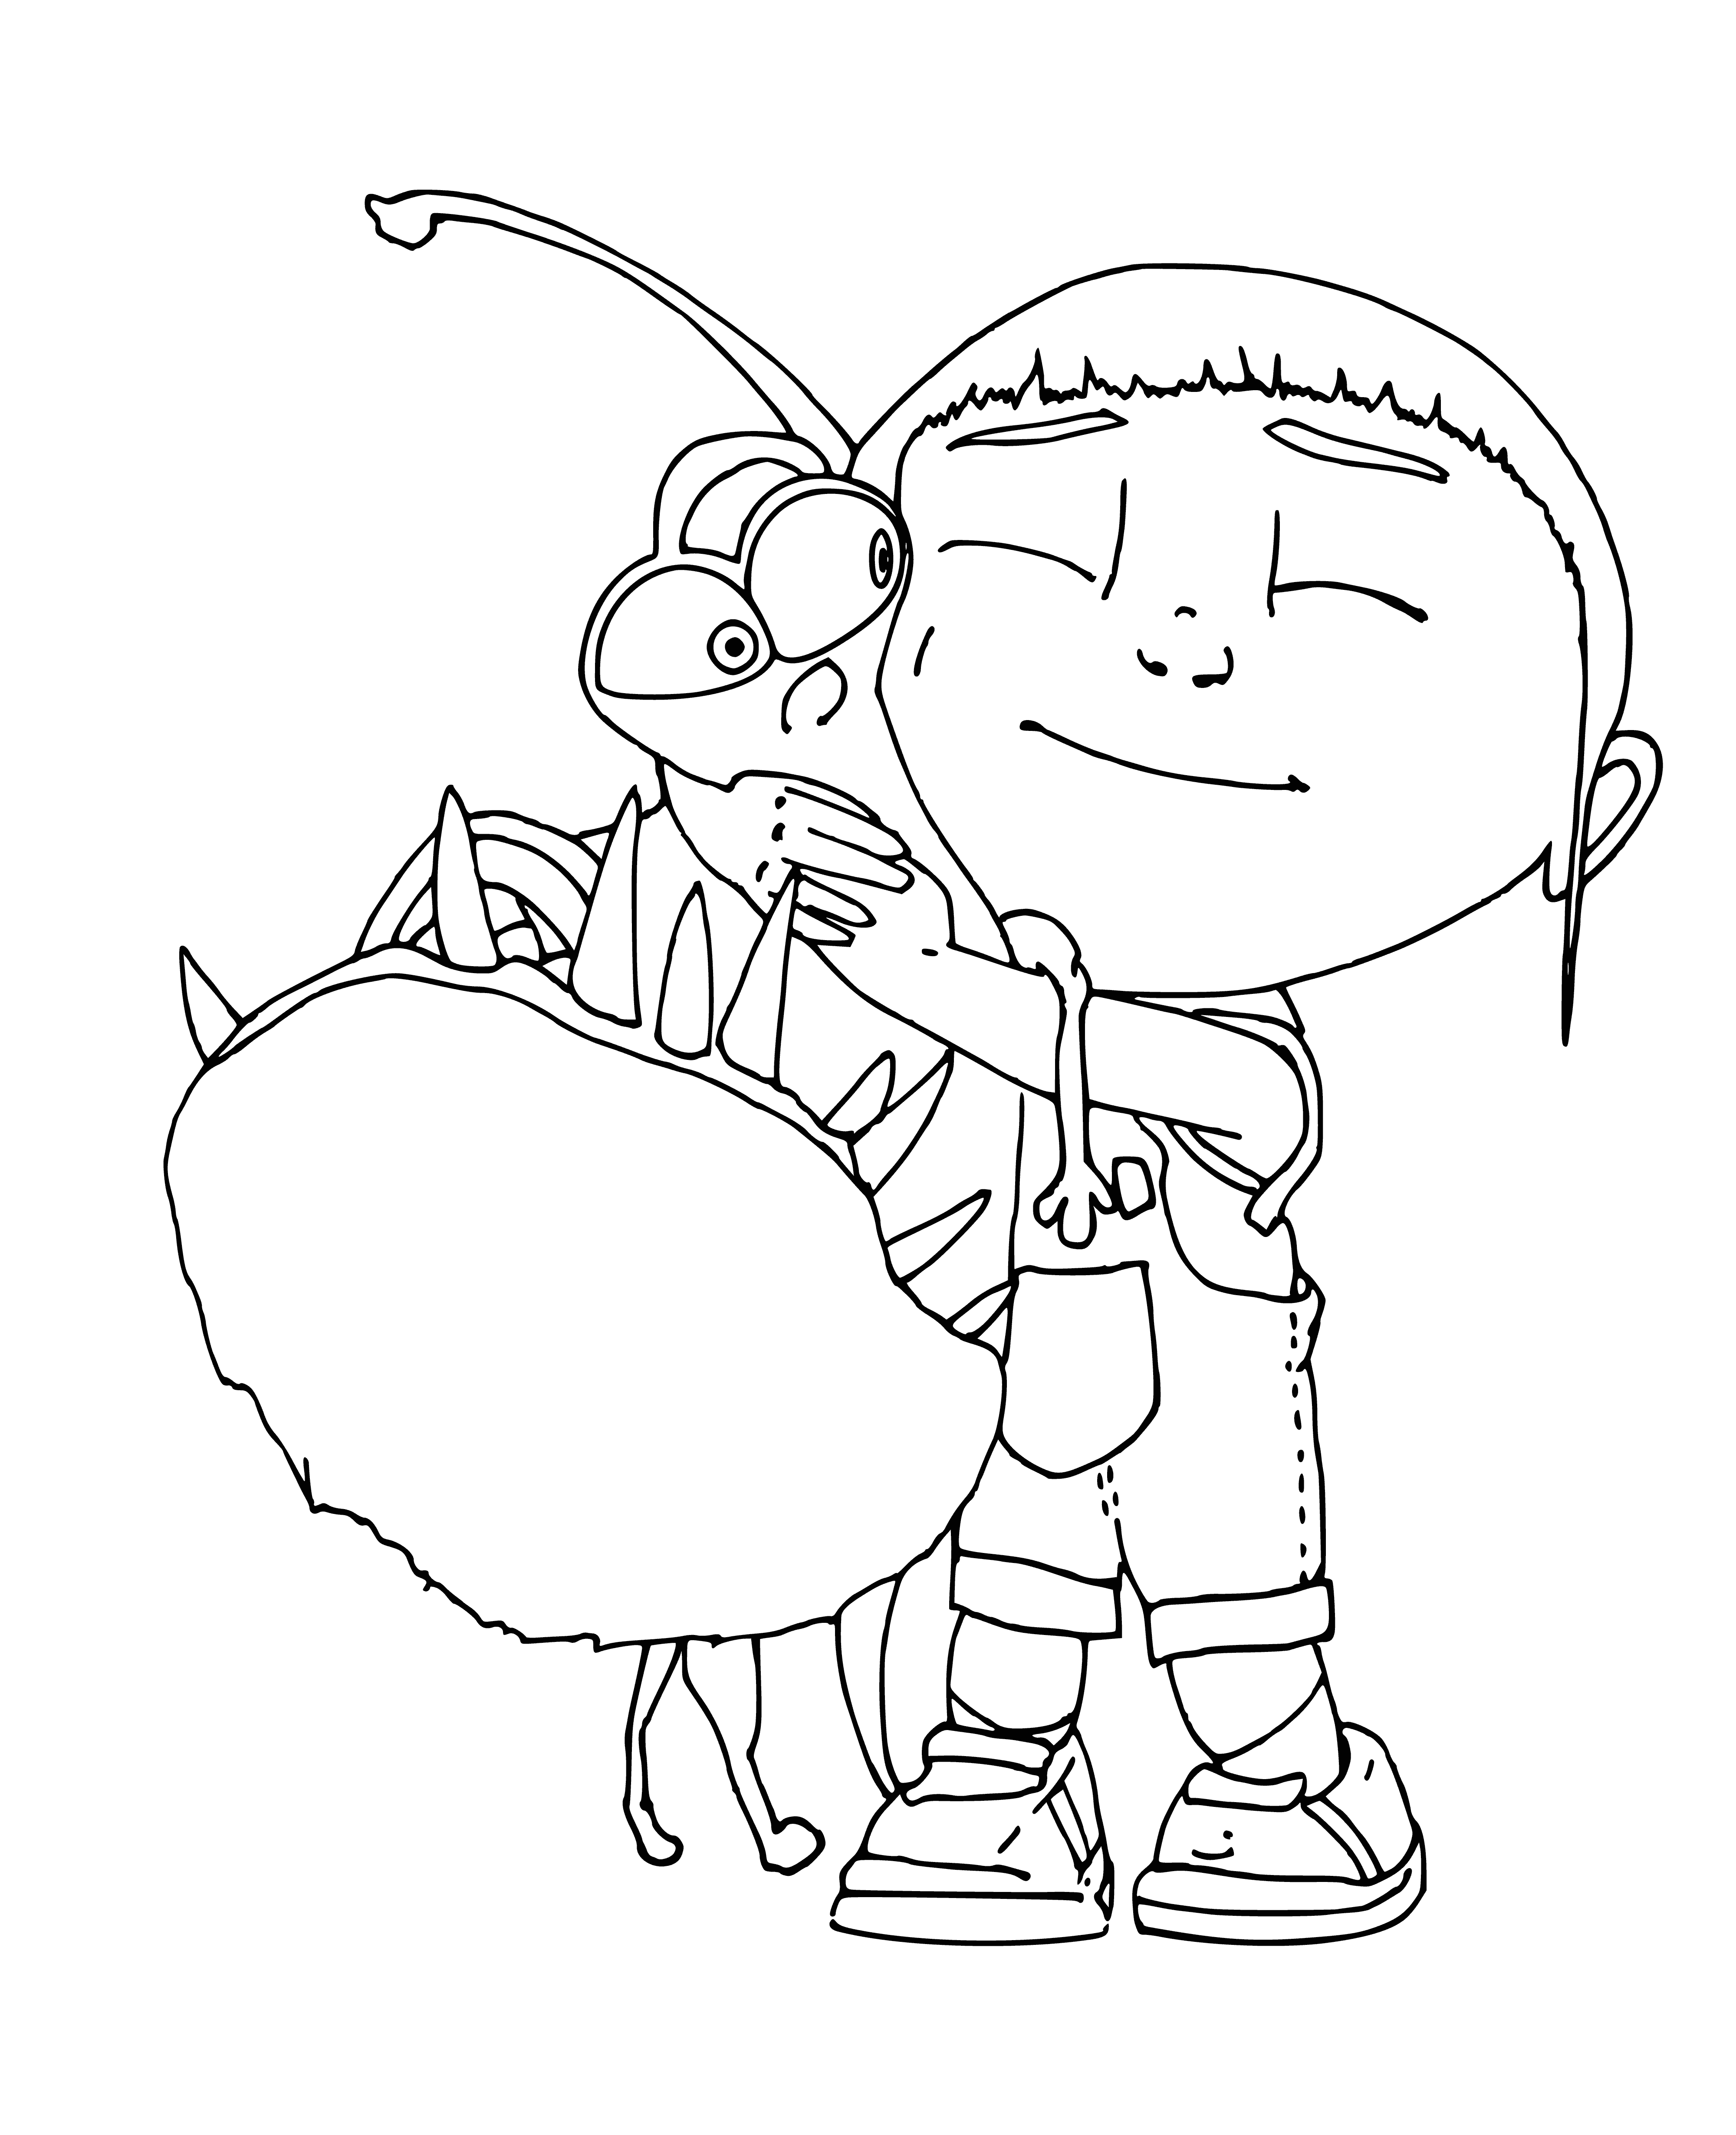 Agnes with Kyle coloring page